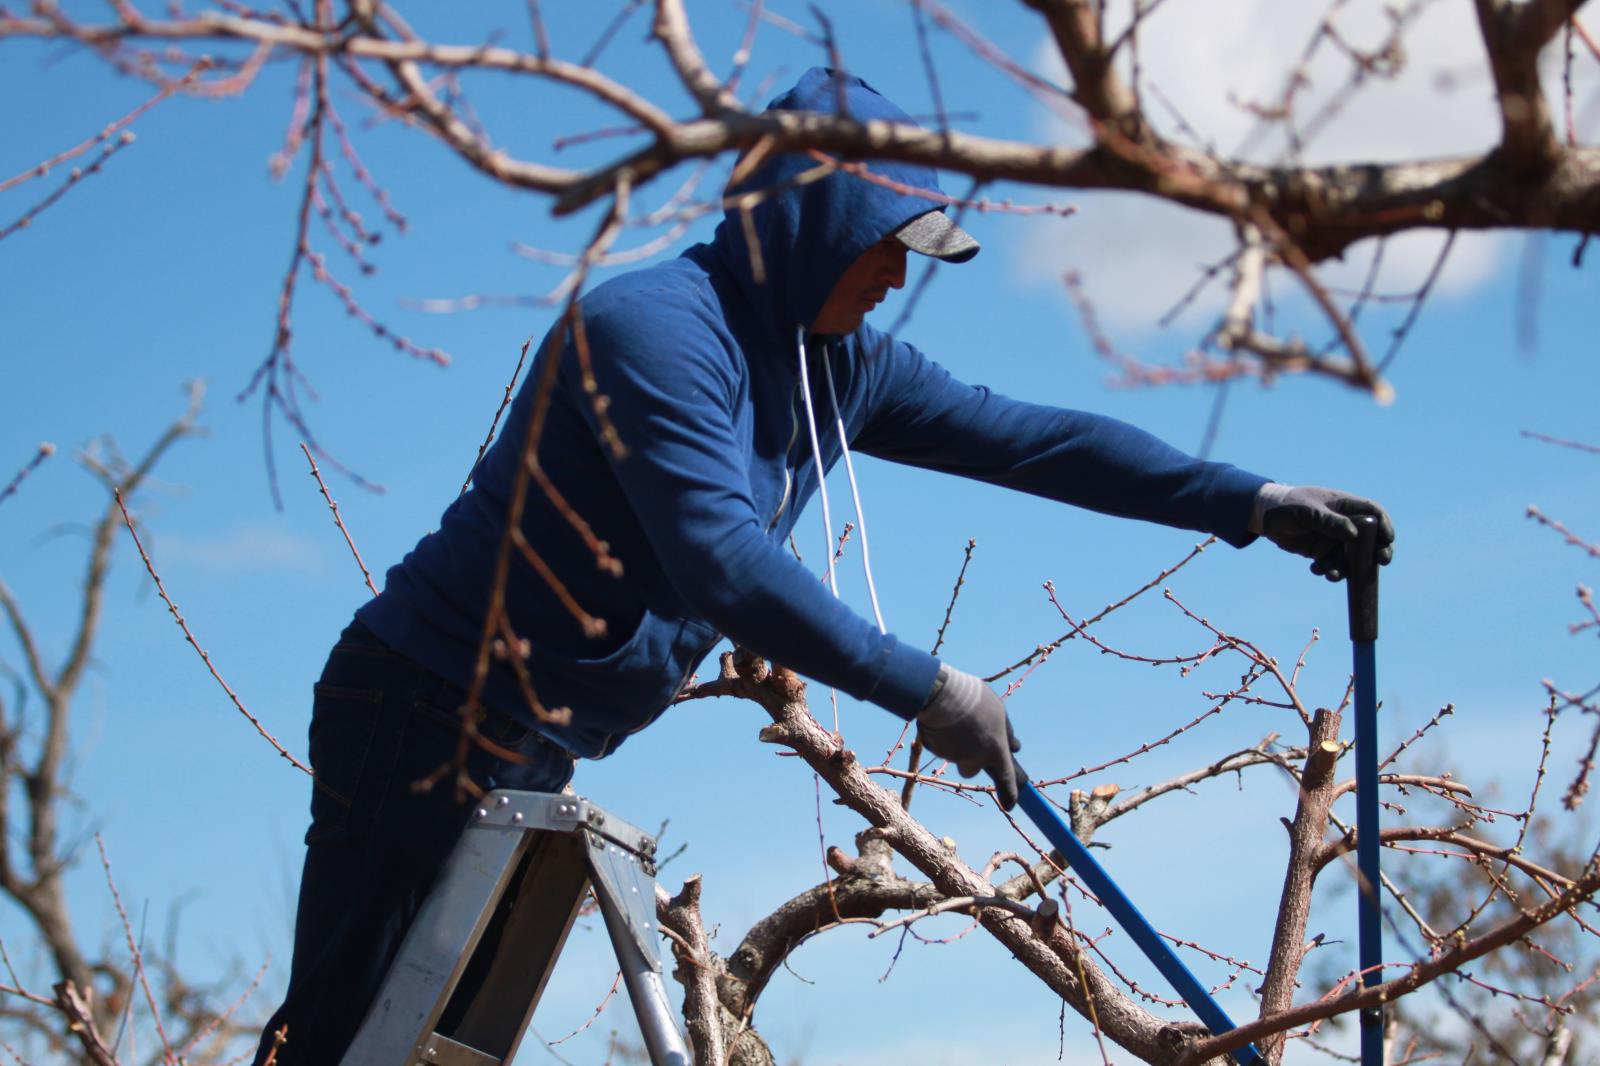 A foreign agricultural guest worker here under the federal H-2A visa program prunes trees in an orchard near Fruitland in 2019. A court-ordered injunction has blocked a new U.S. Department of Labor rule that would have frozen minimum H-2A wage rates for two years. 